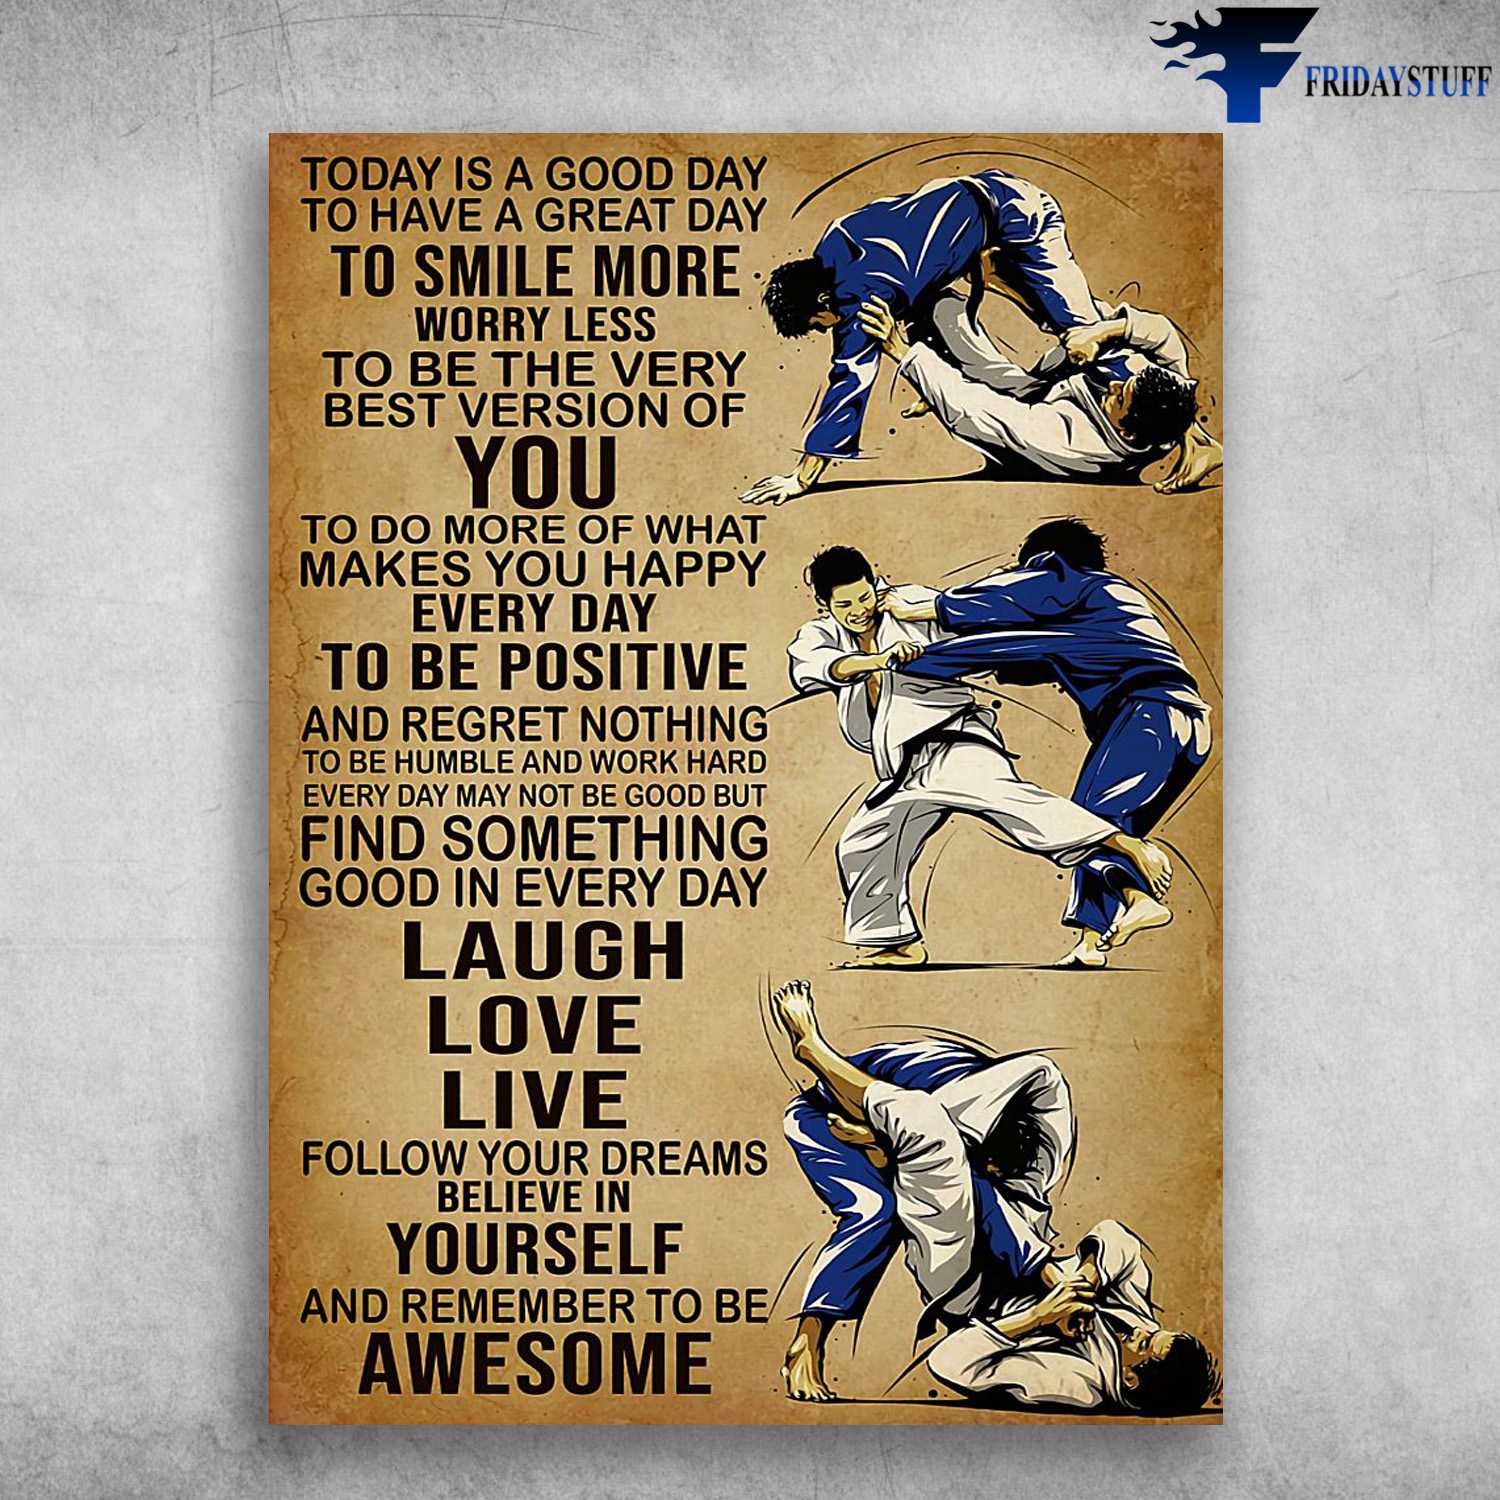 Jiu Jitsu Poster, Today Is A Good Day, To Have A Great Day, To Smile More Worry Less, To Be The Very Best Version Of You, To Do More Of What Makes You Happy Everyday